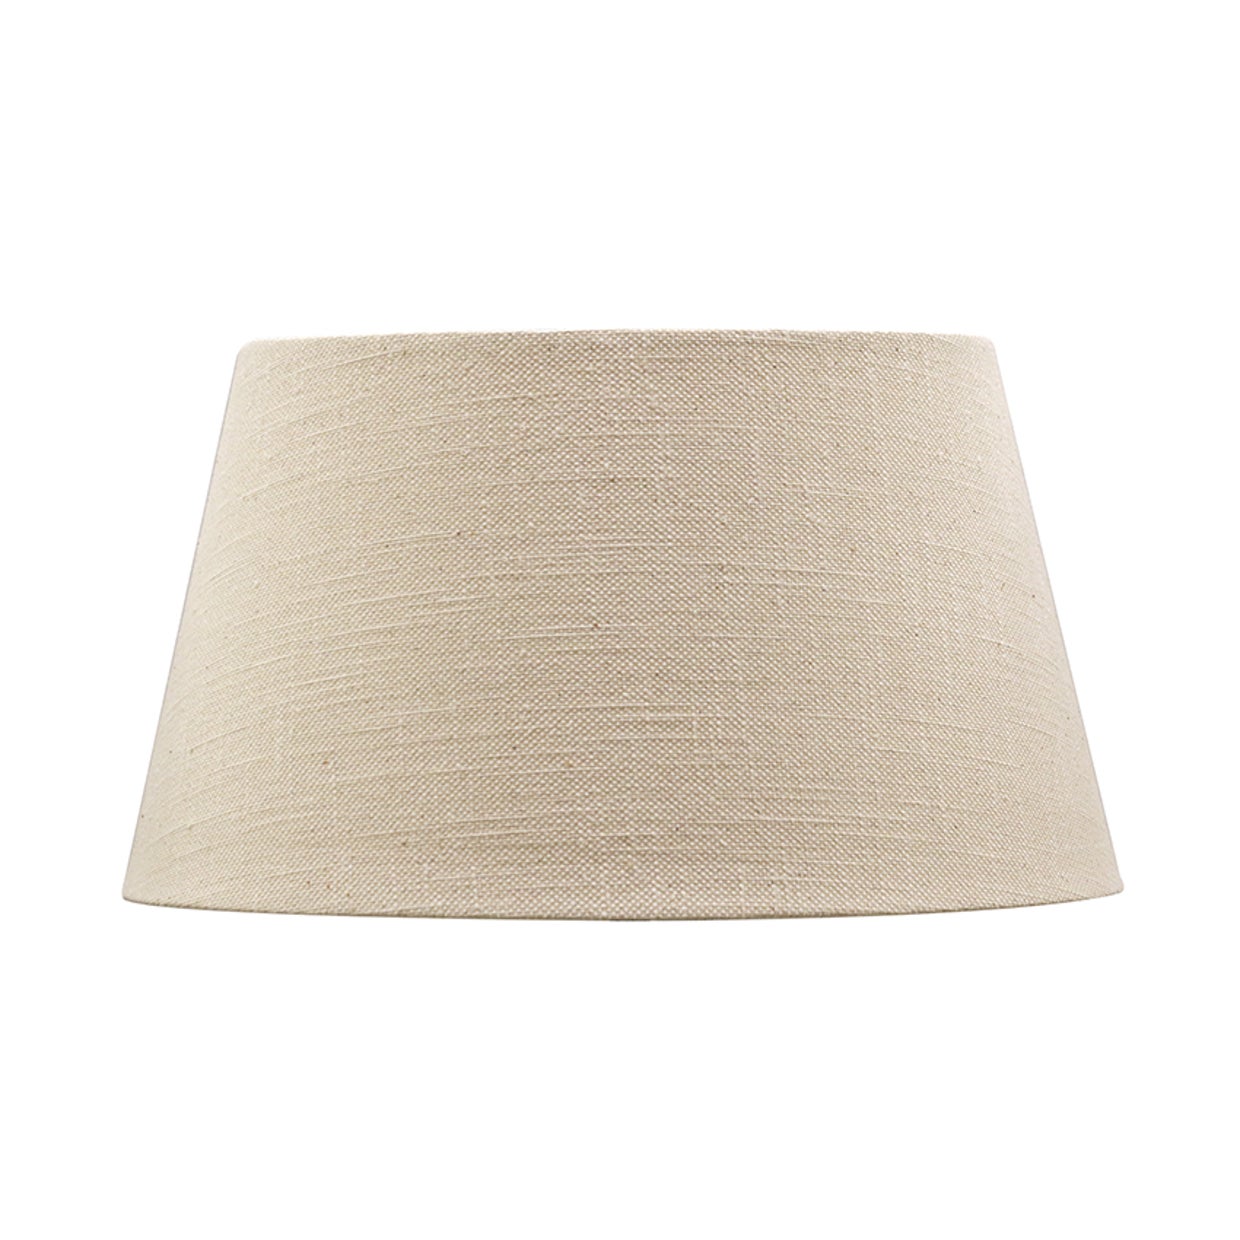 BEIGE WOVEN LINEN STYLE 46CM TAPERED DRUM LAMPSHADE